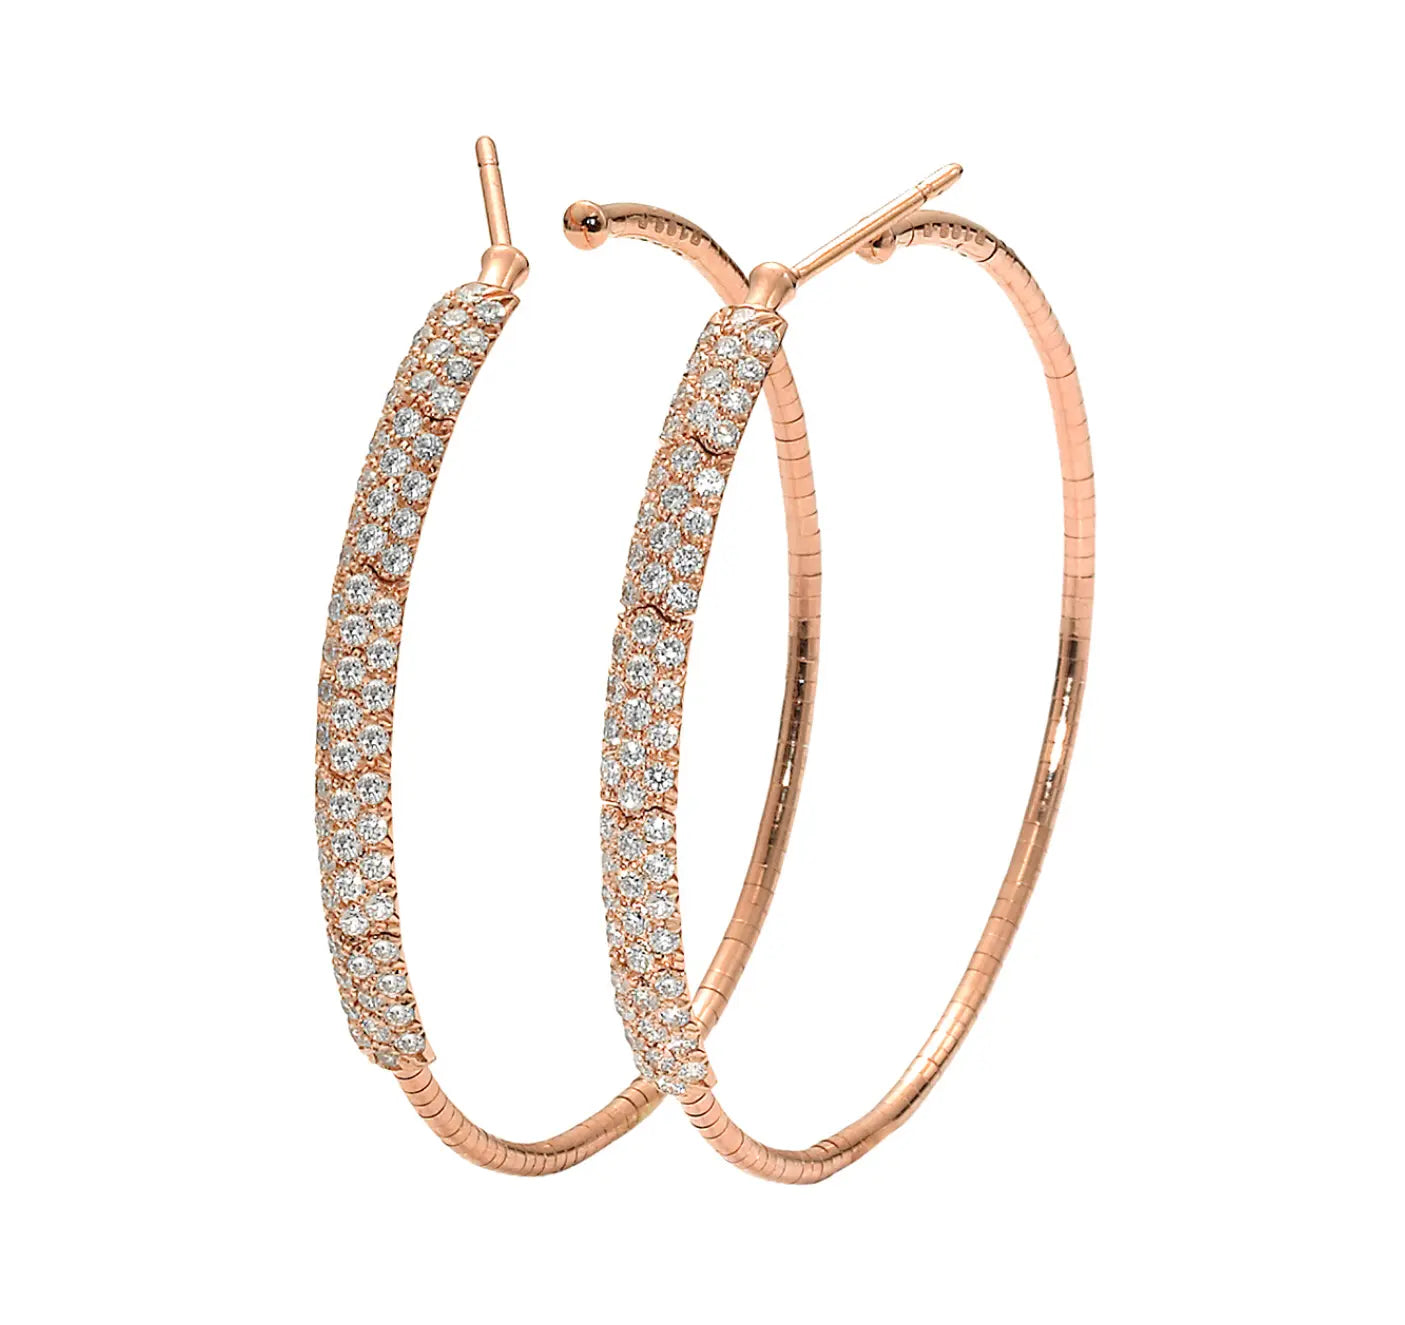 18K Rose Gold and titanium earrings with 1.52 tcw round diamonds.  Measures 1.5 inches in length.  Designed by Mattia Cielo and made in Italy